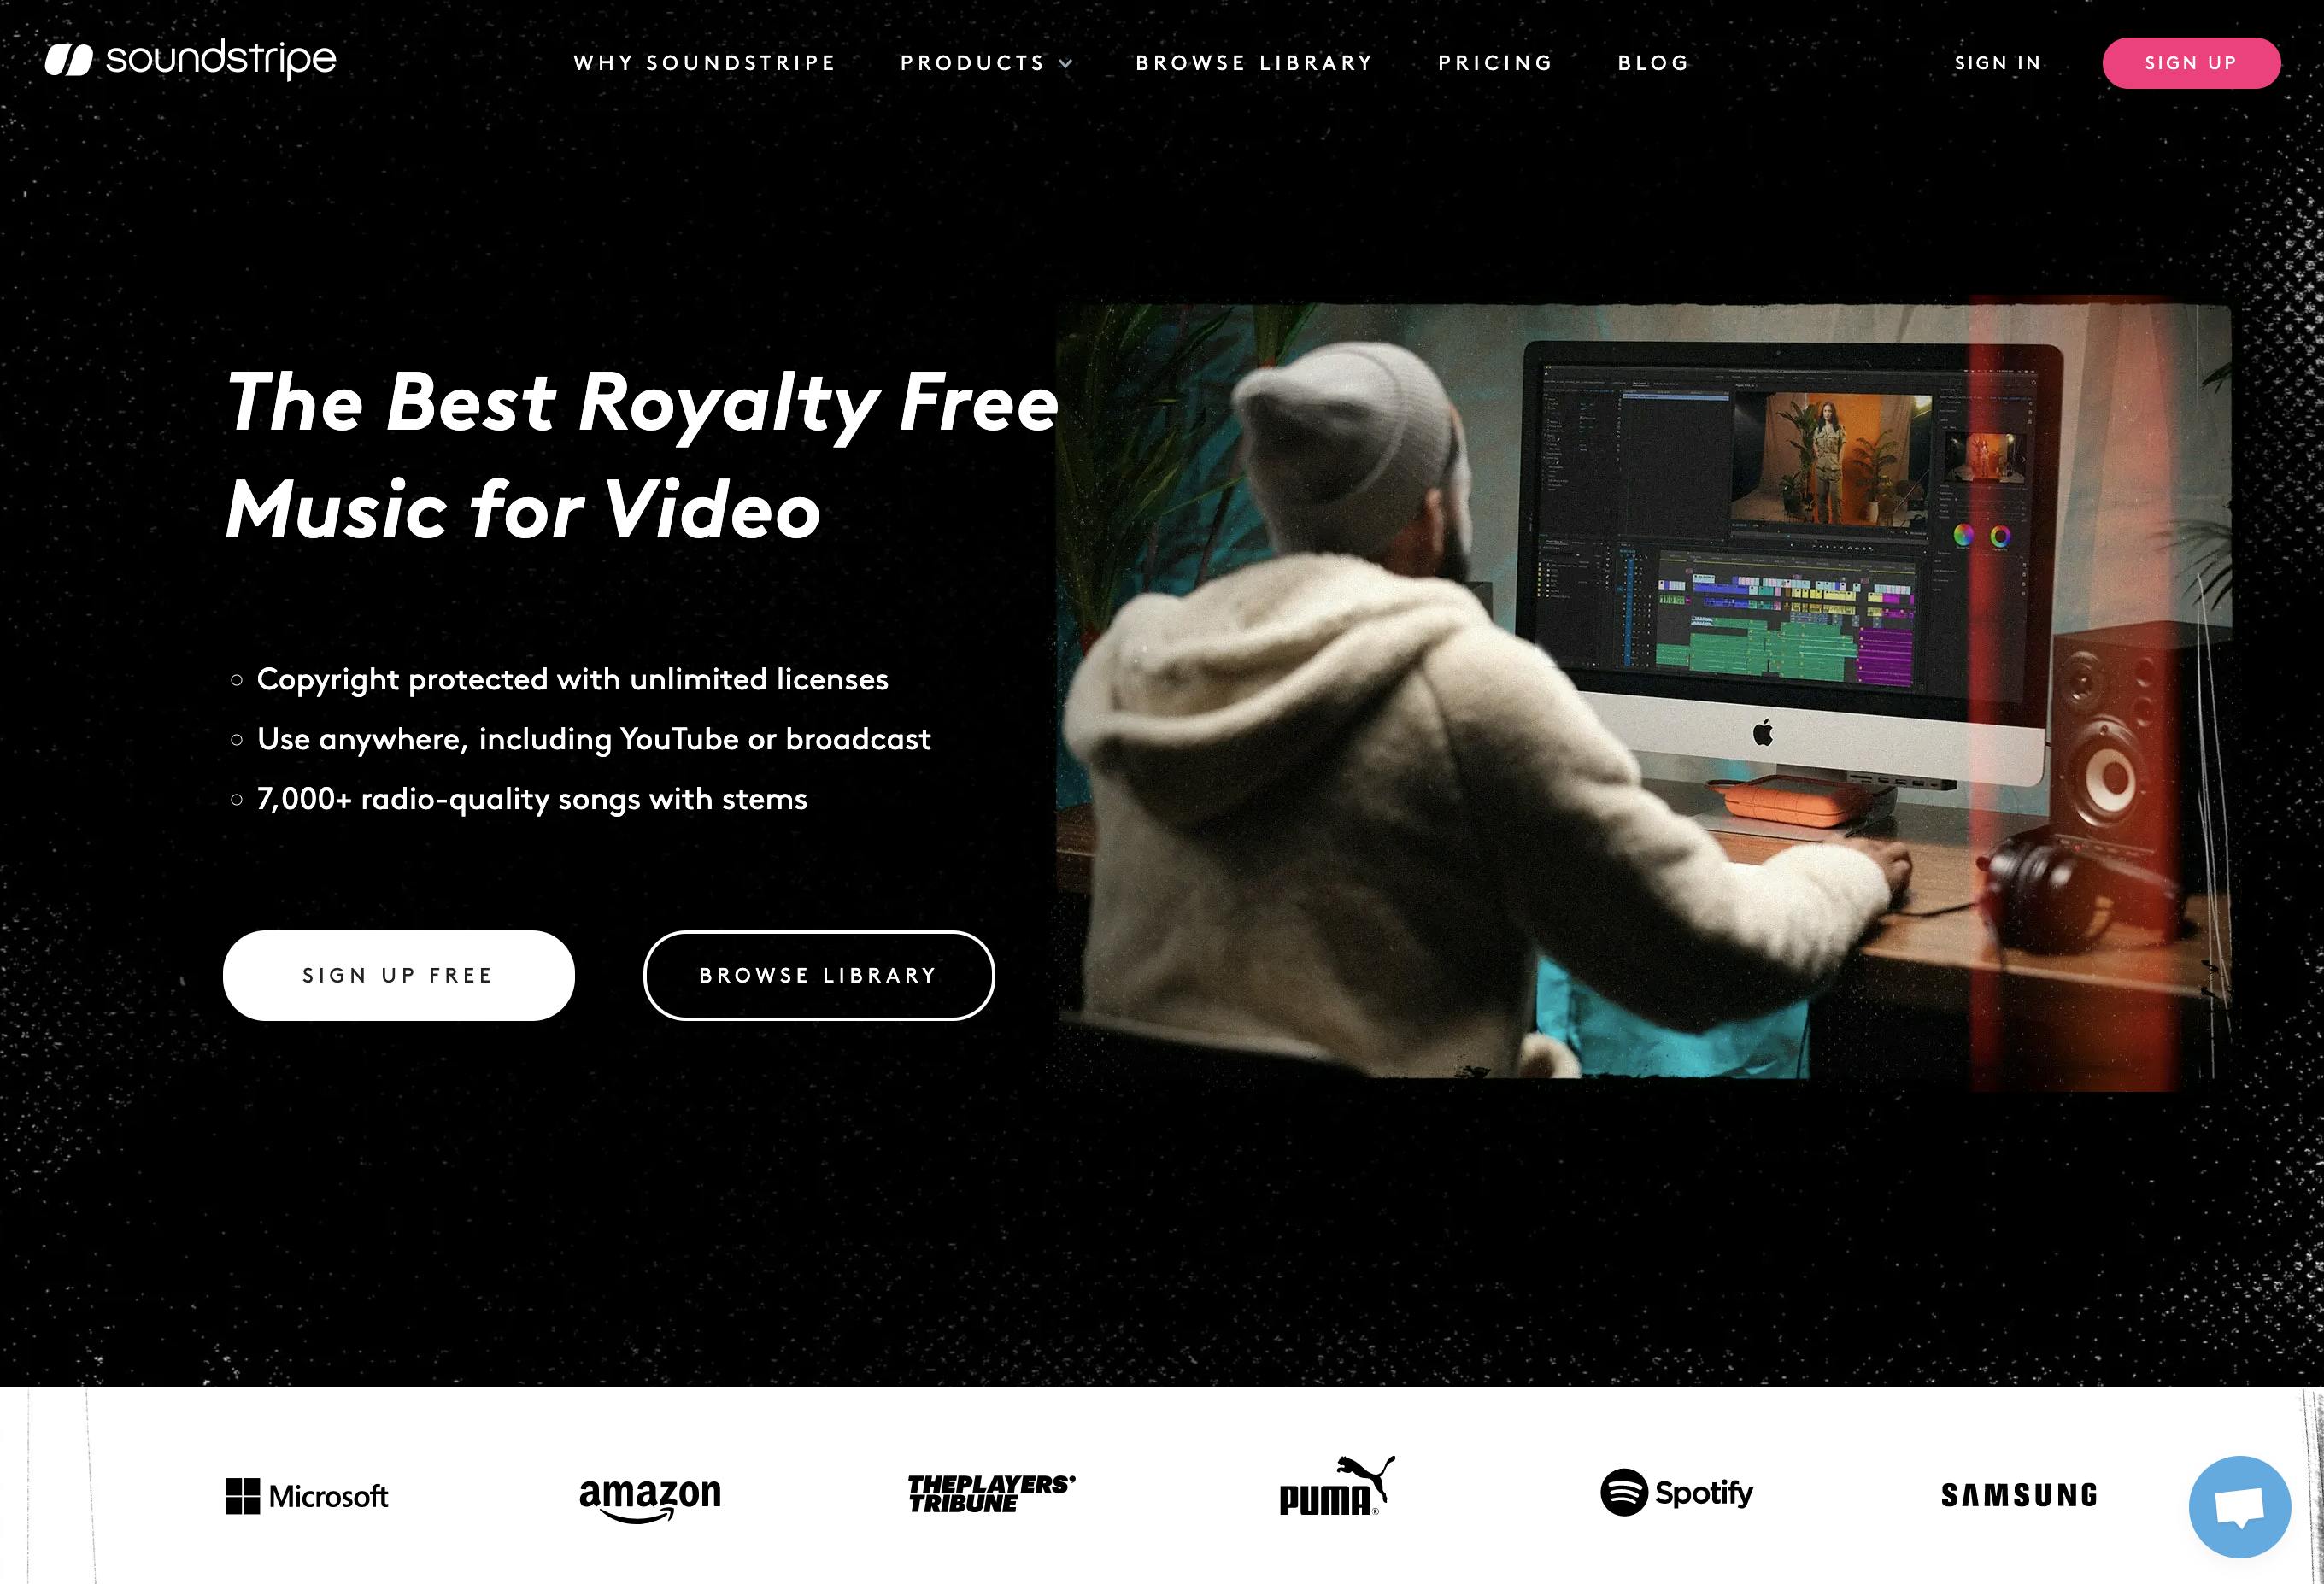 The Best Sites for Royalty-Free Music – Padcaster